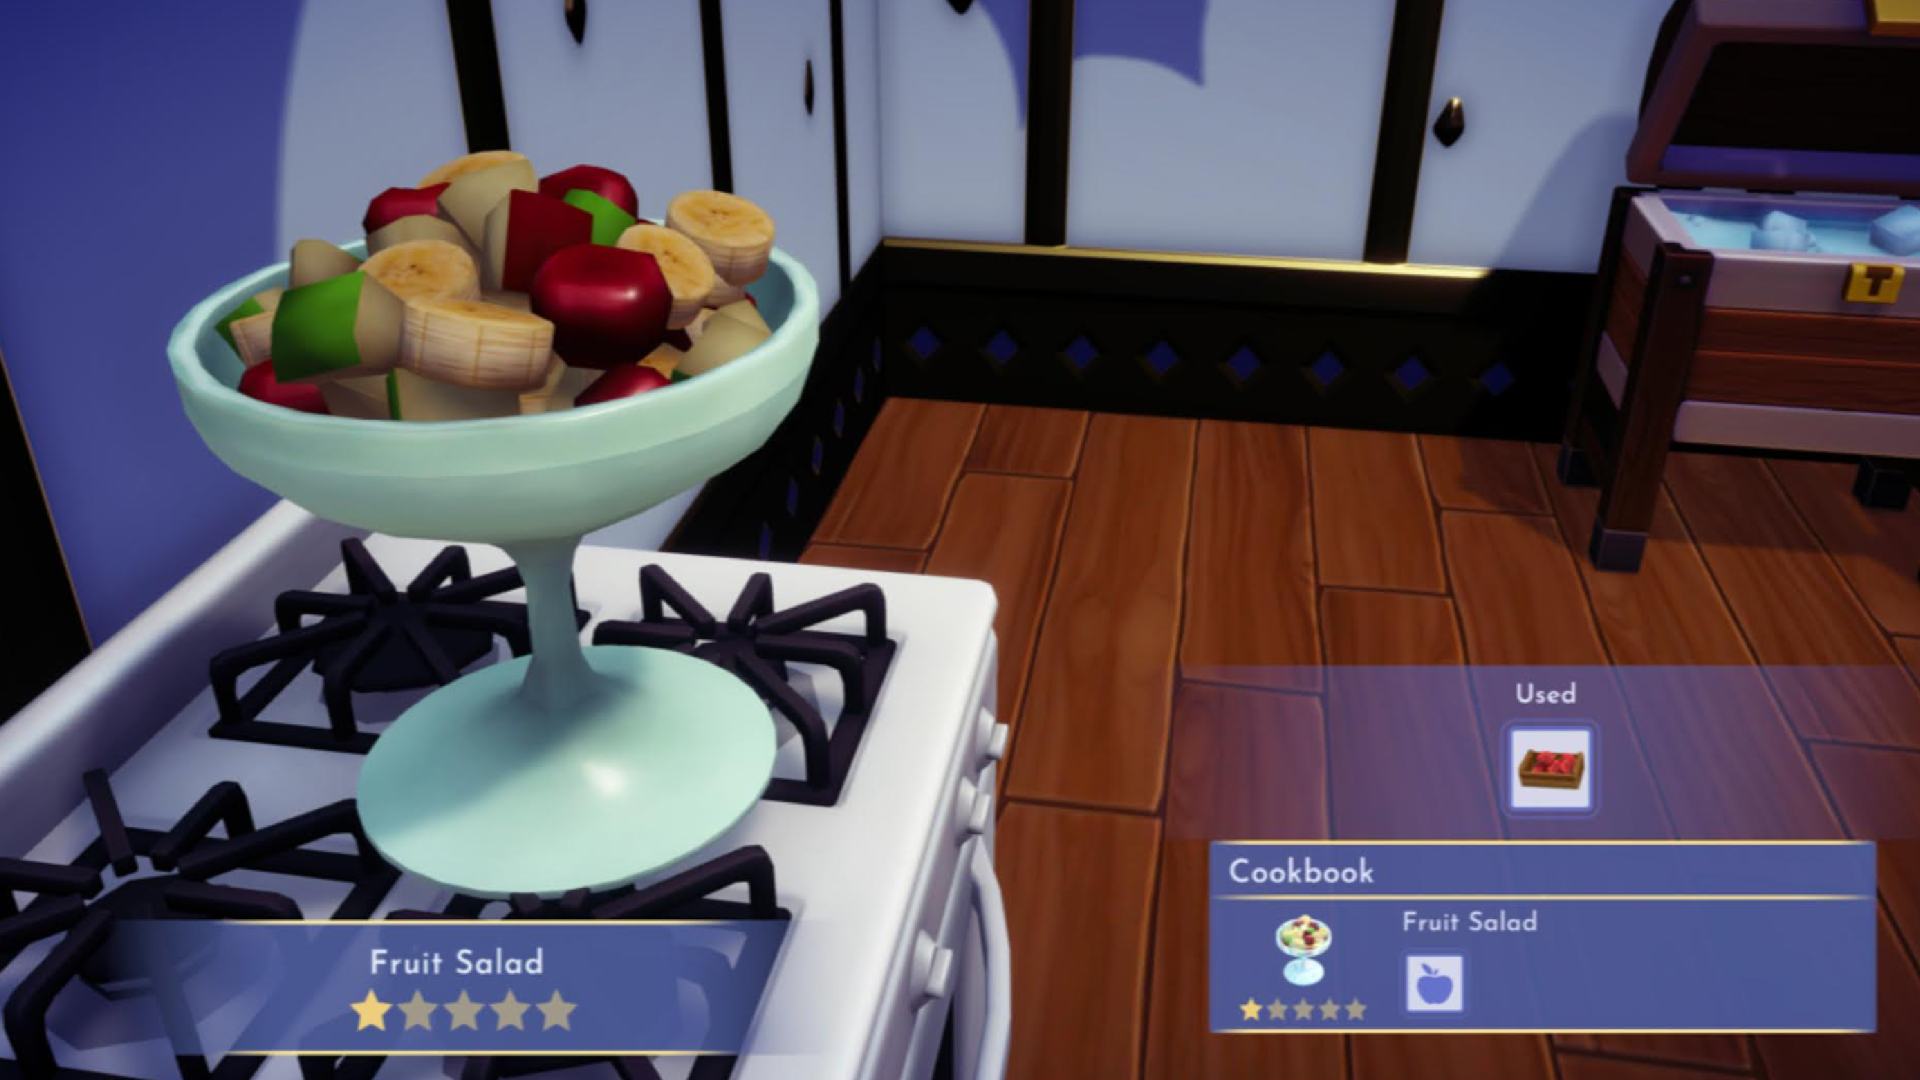 Disney Dreamlight Valley Best Recipes: The Fruit Salad can be seen on a stove